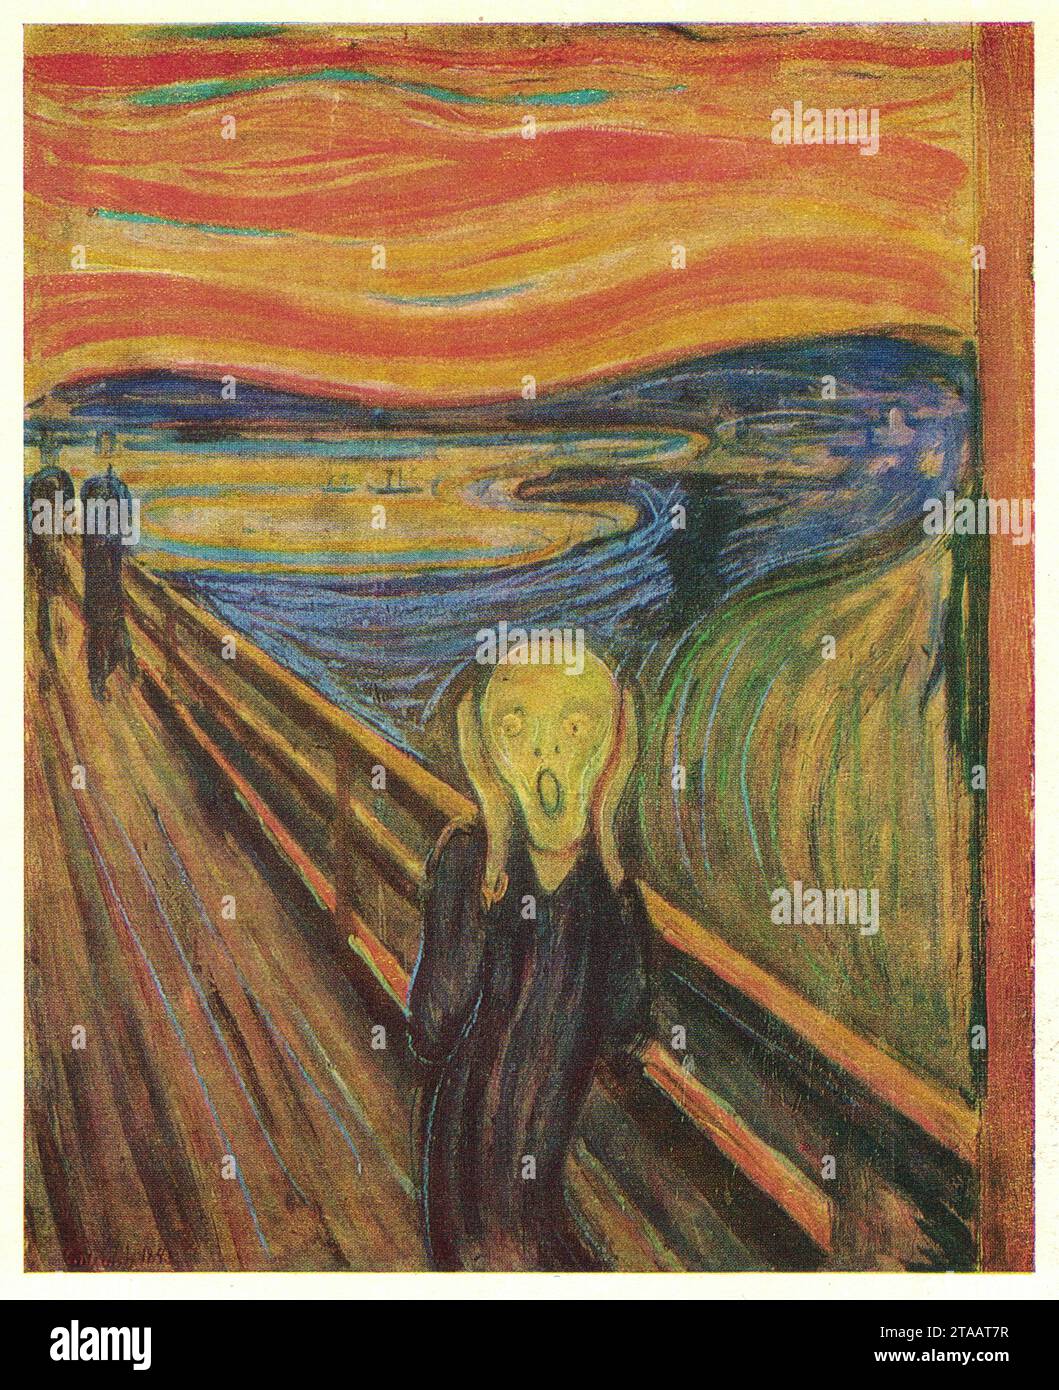 Artwork The Scream by Edvard Munch, 1893. oil on canvas. Edvard Munch (12 December 1863 – 23 January 1944) was a Norwegian painter. His 1893 work, The Scream, has become one of Western art's most acclaimed images. The Scream is Munch's most famous work, and one of the most recognizable paintings in all art. It has been widely interpreted as representing the universal anxiety of modern man. Painted with broad bands of garish color and highly simplified forms, and employing a high viewpoint, it reduces the agonized figure to a garbed skull in the throes of an emotional crisis. With this pain Stock Photo